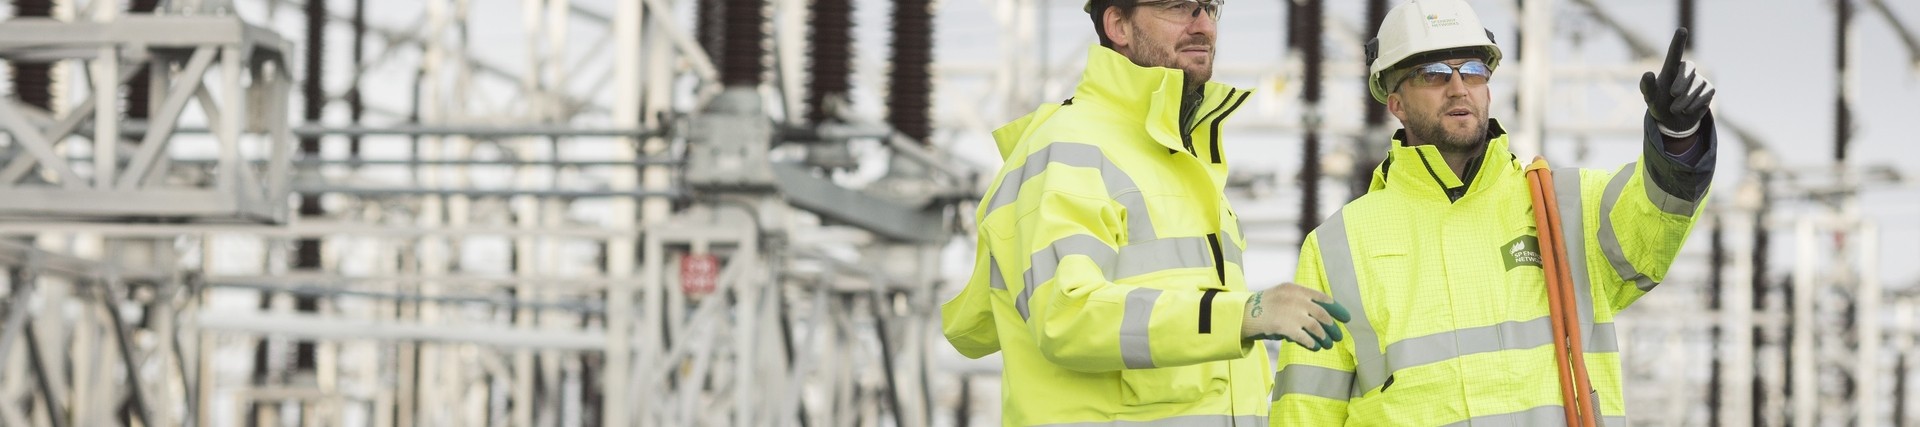 Scottish Power Transmissions: Innovation and investment powering an exciting future